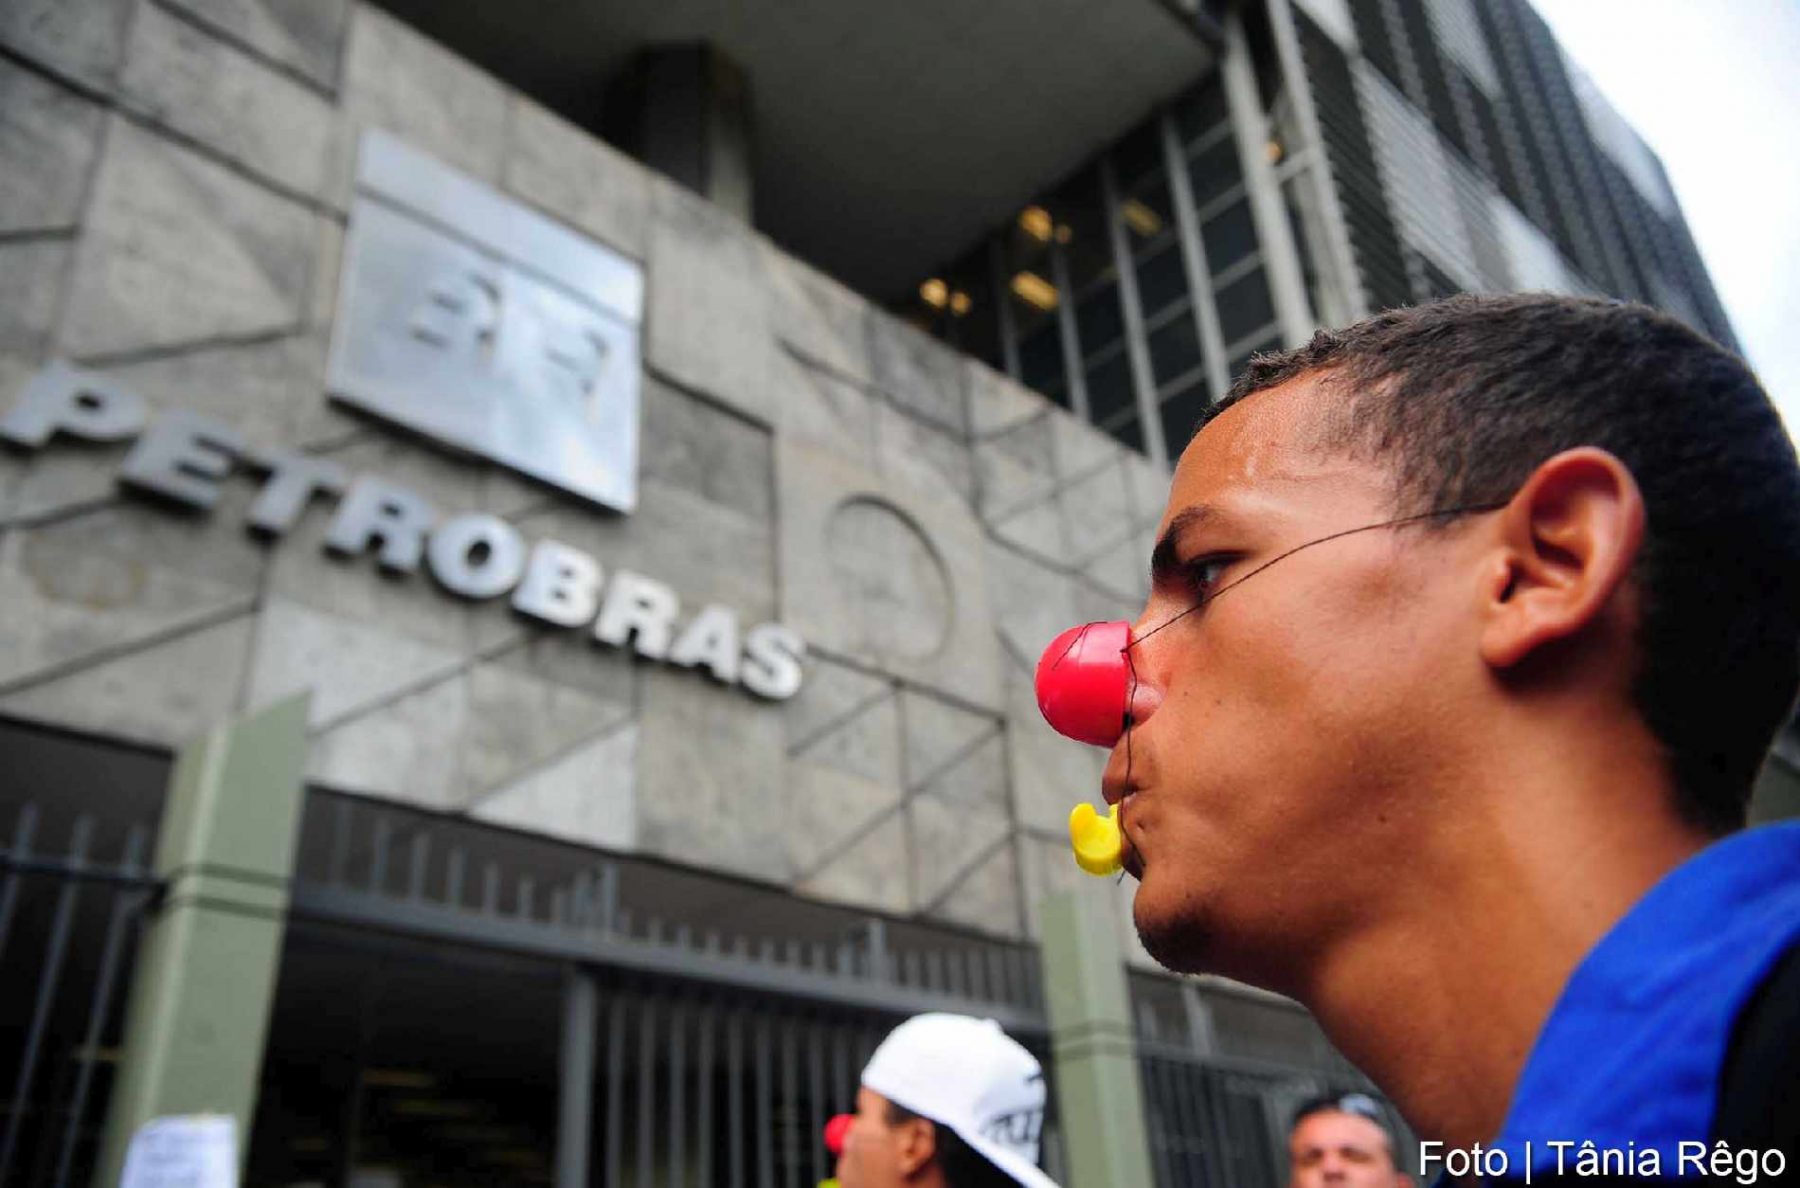 Protesters in front of the Petrobras building - Tânia Rêgo